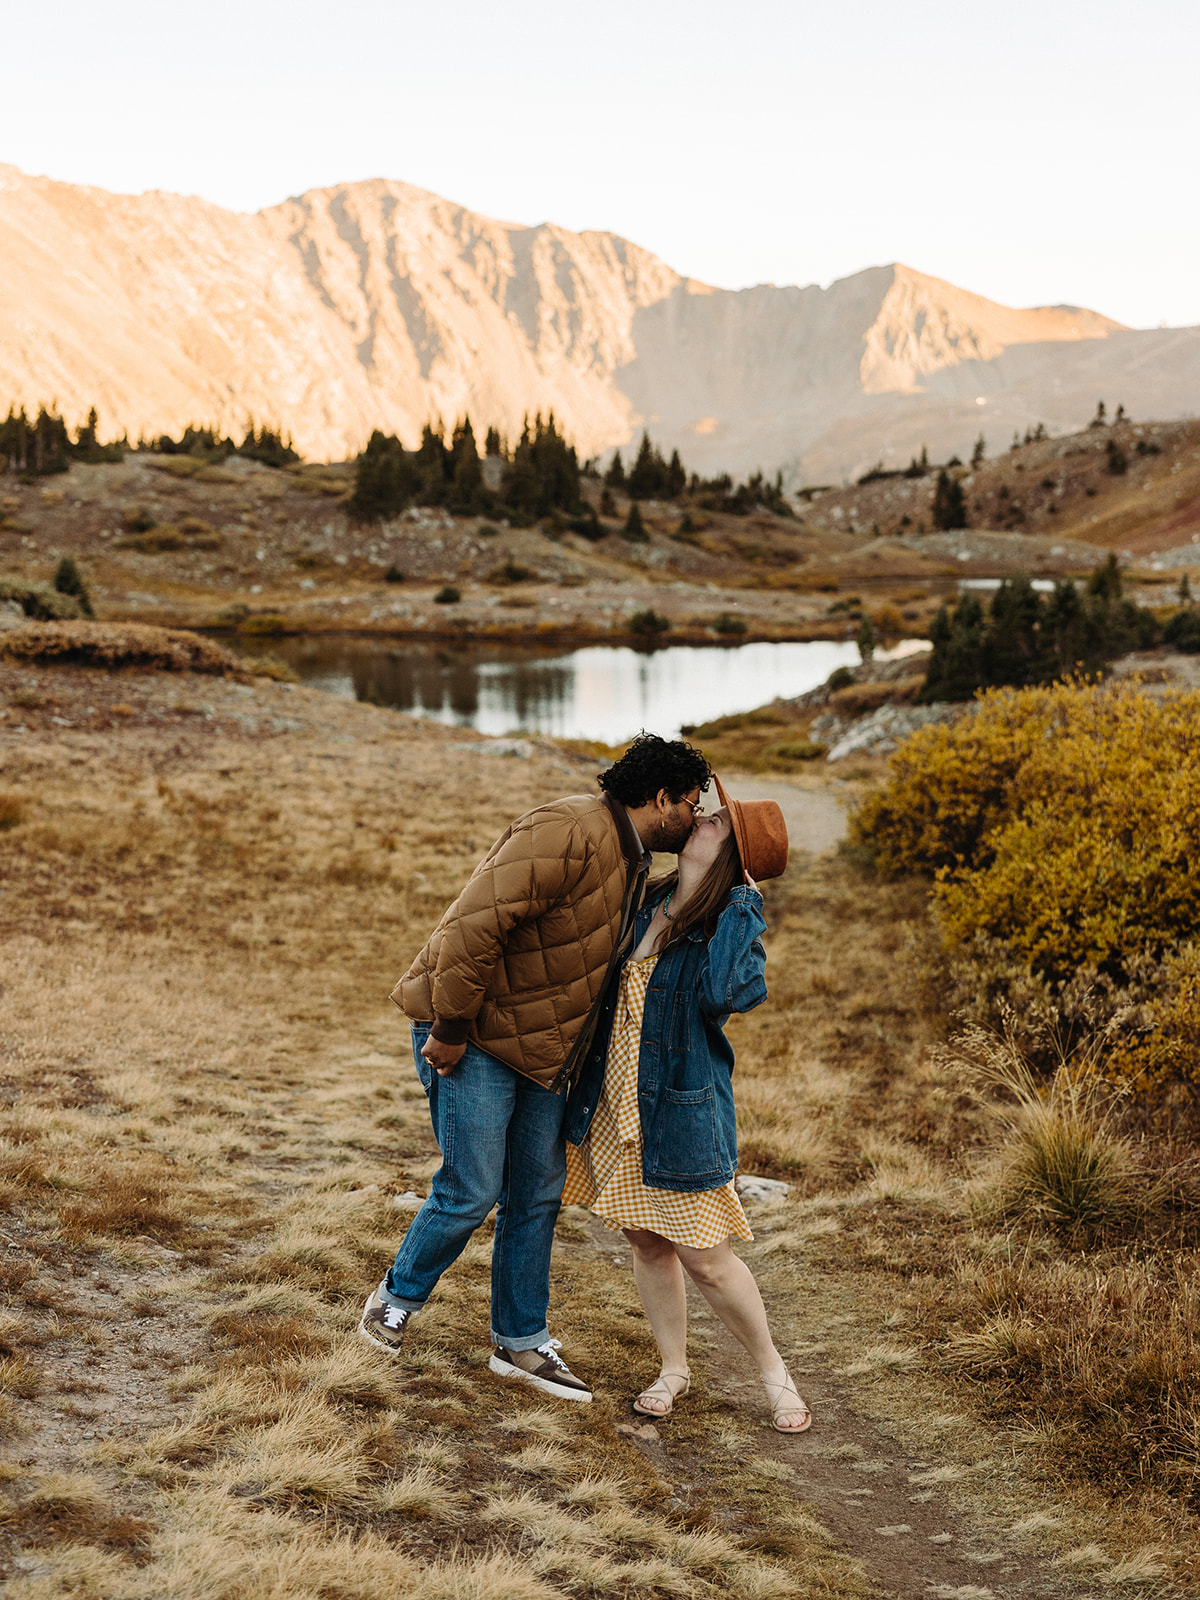 Woman in a yellow dress, brown hat, and jean jacket holds her hat as she looks up to kiss her fiance near the lake.